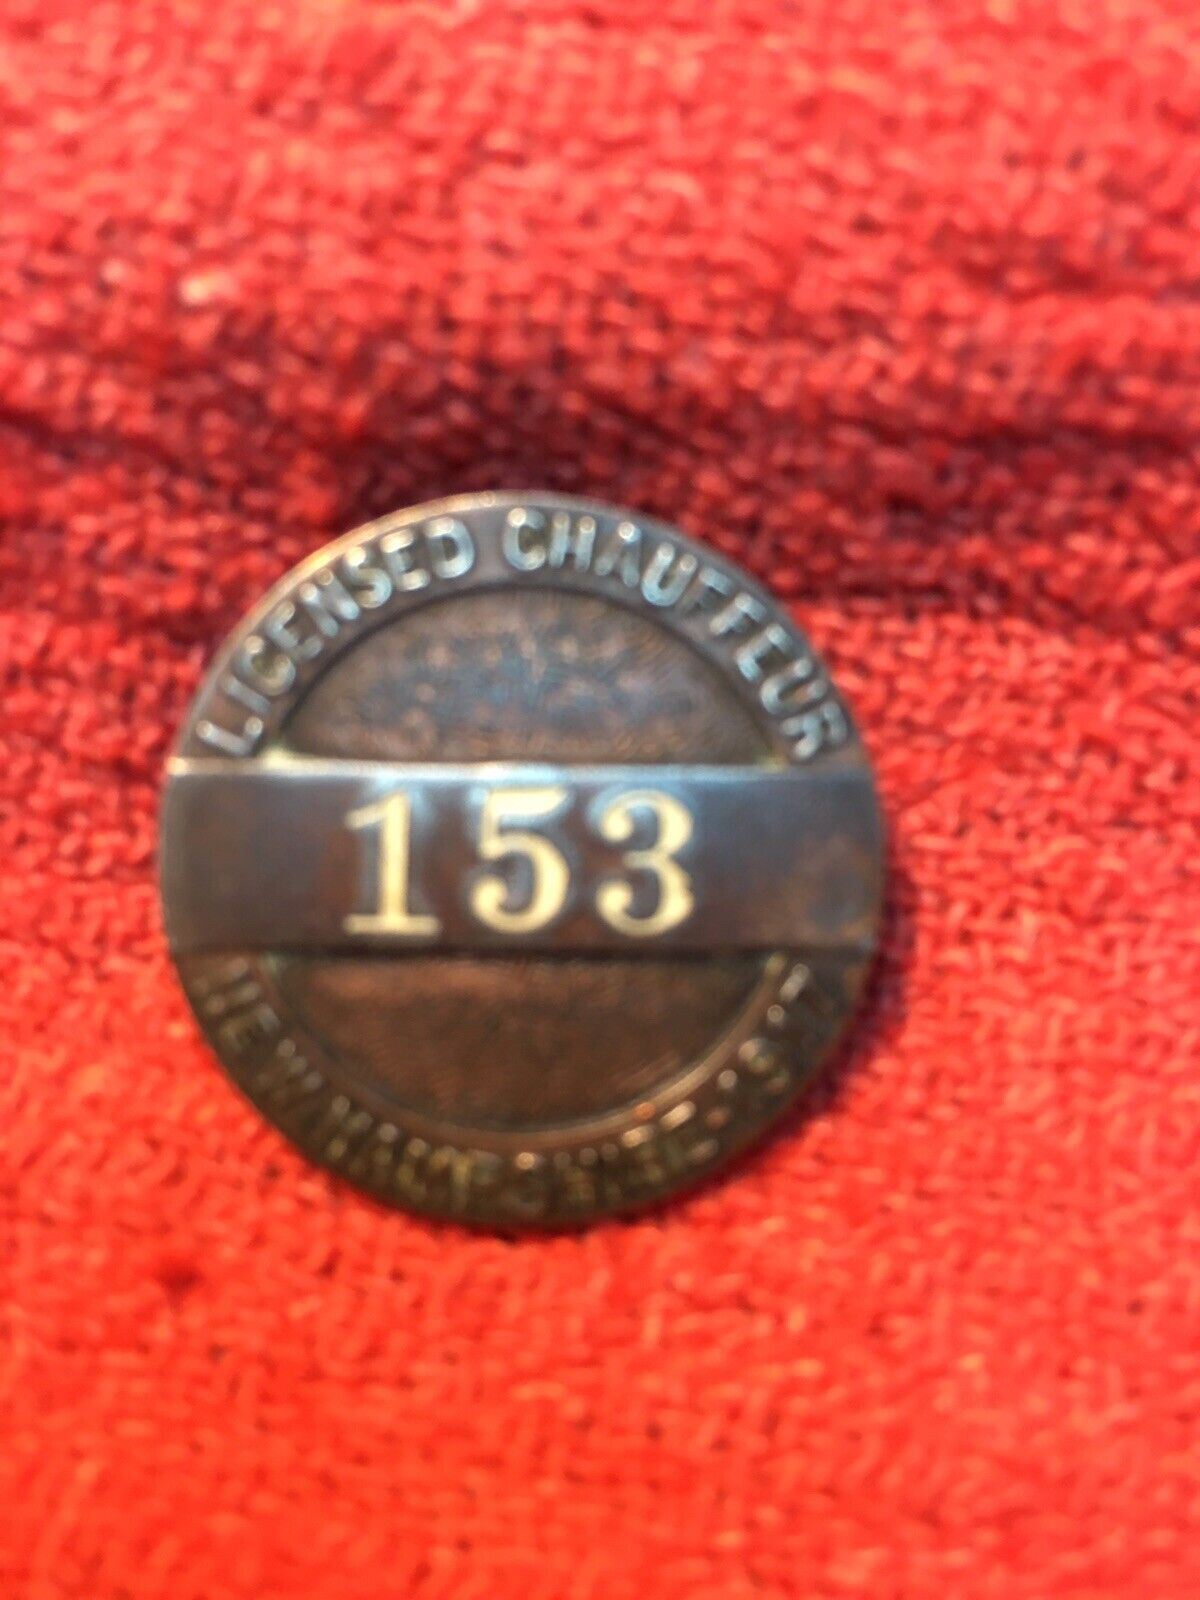 1917  New Hampshire Copper Chauffeur Badge Pin, Low Badge Number ( # 153 )